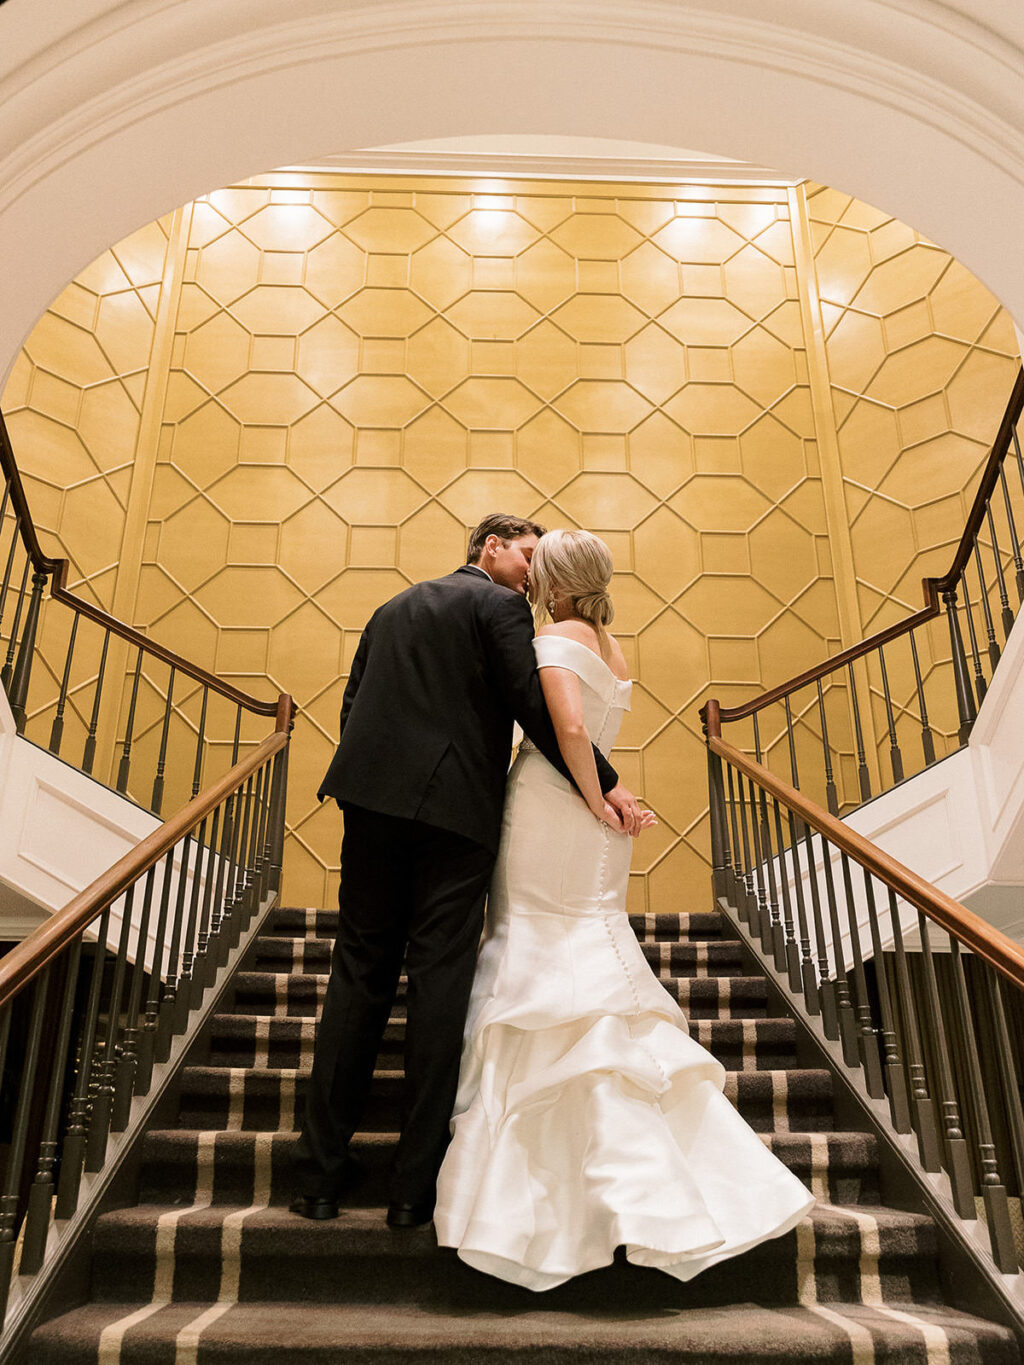 Romantic Bride and Groom Wedding Portrait | | Downtown Venue The Tampa Club | Planner Perfecting the Plan